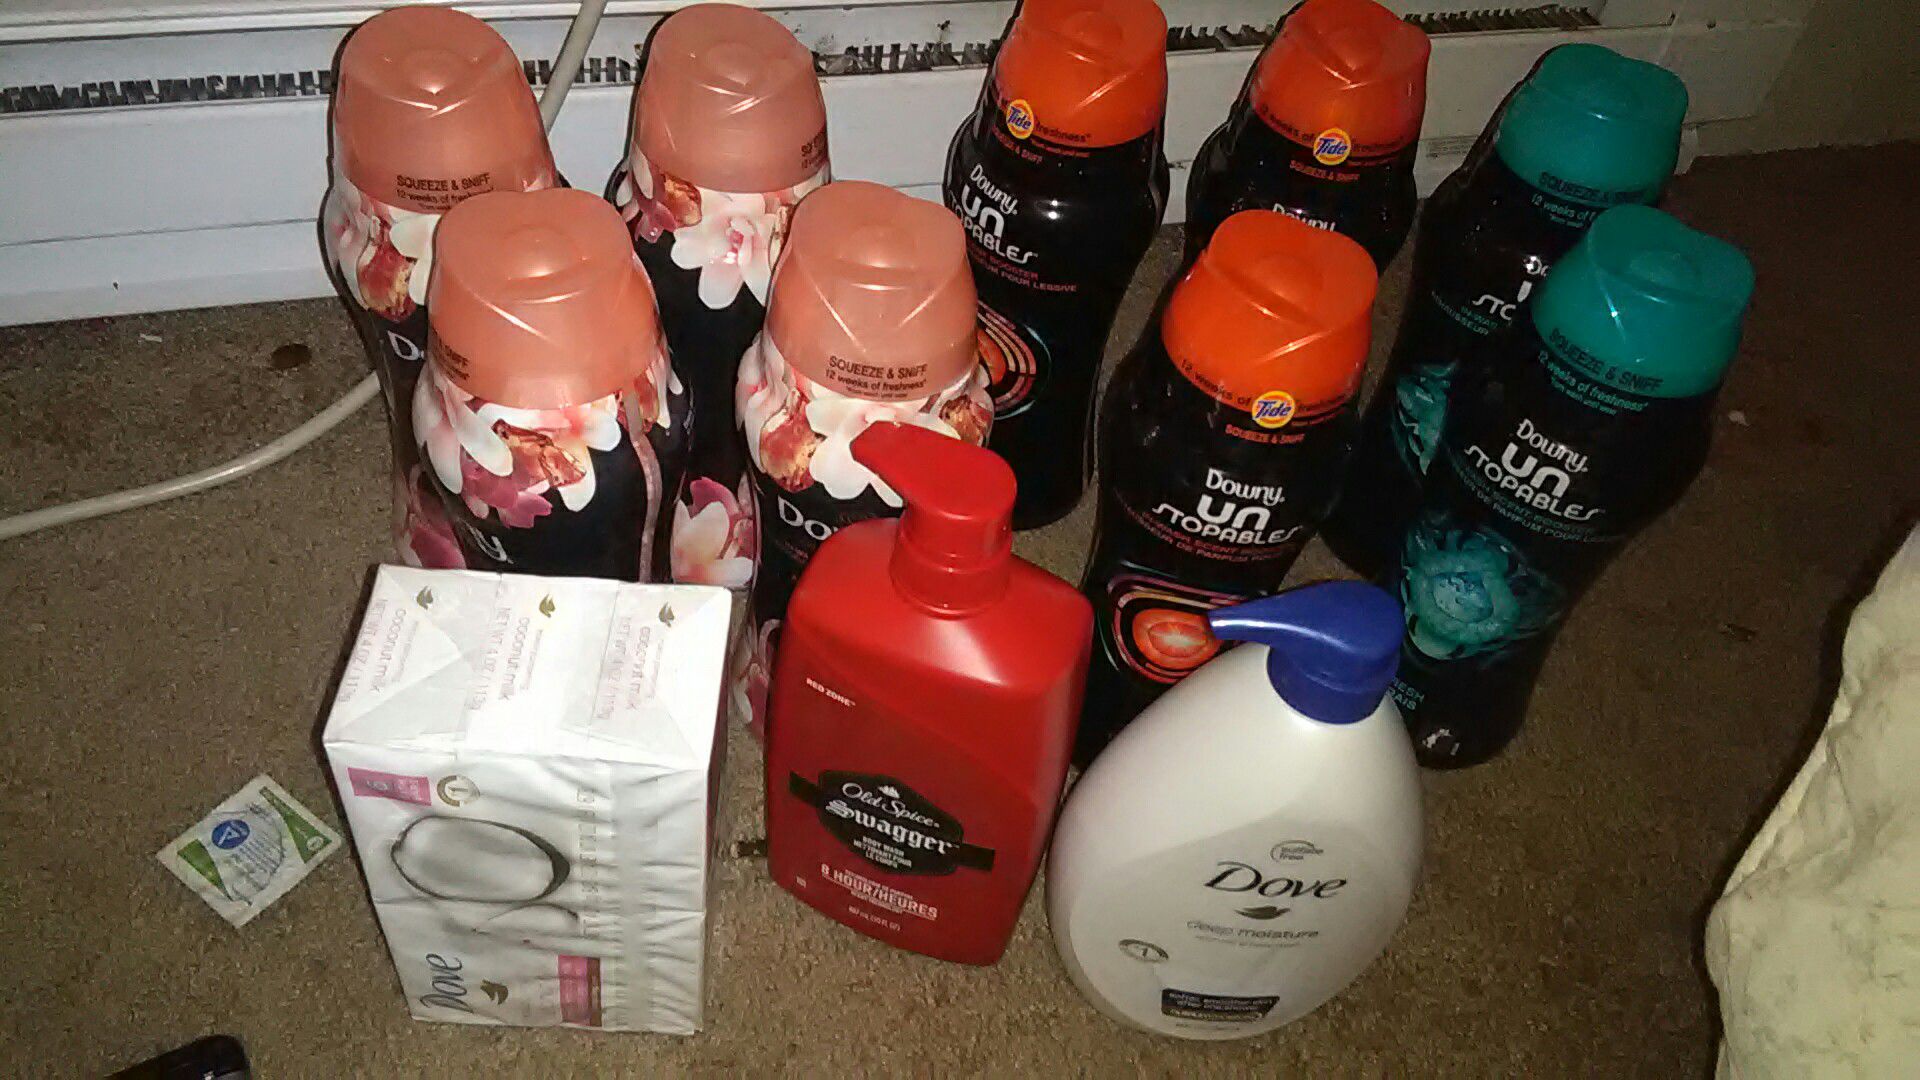 Beads downy ,bar soaps , dove body wash.. Old spice body wash